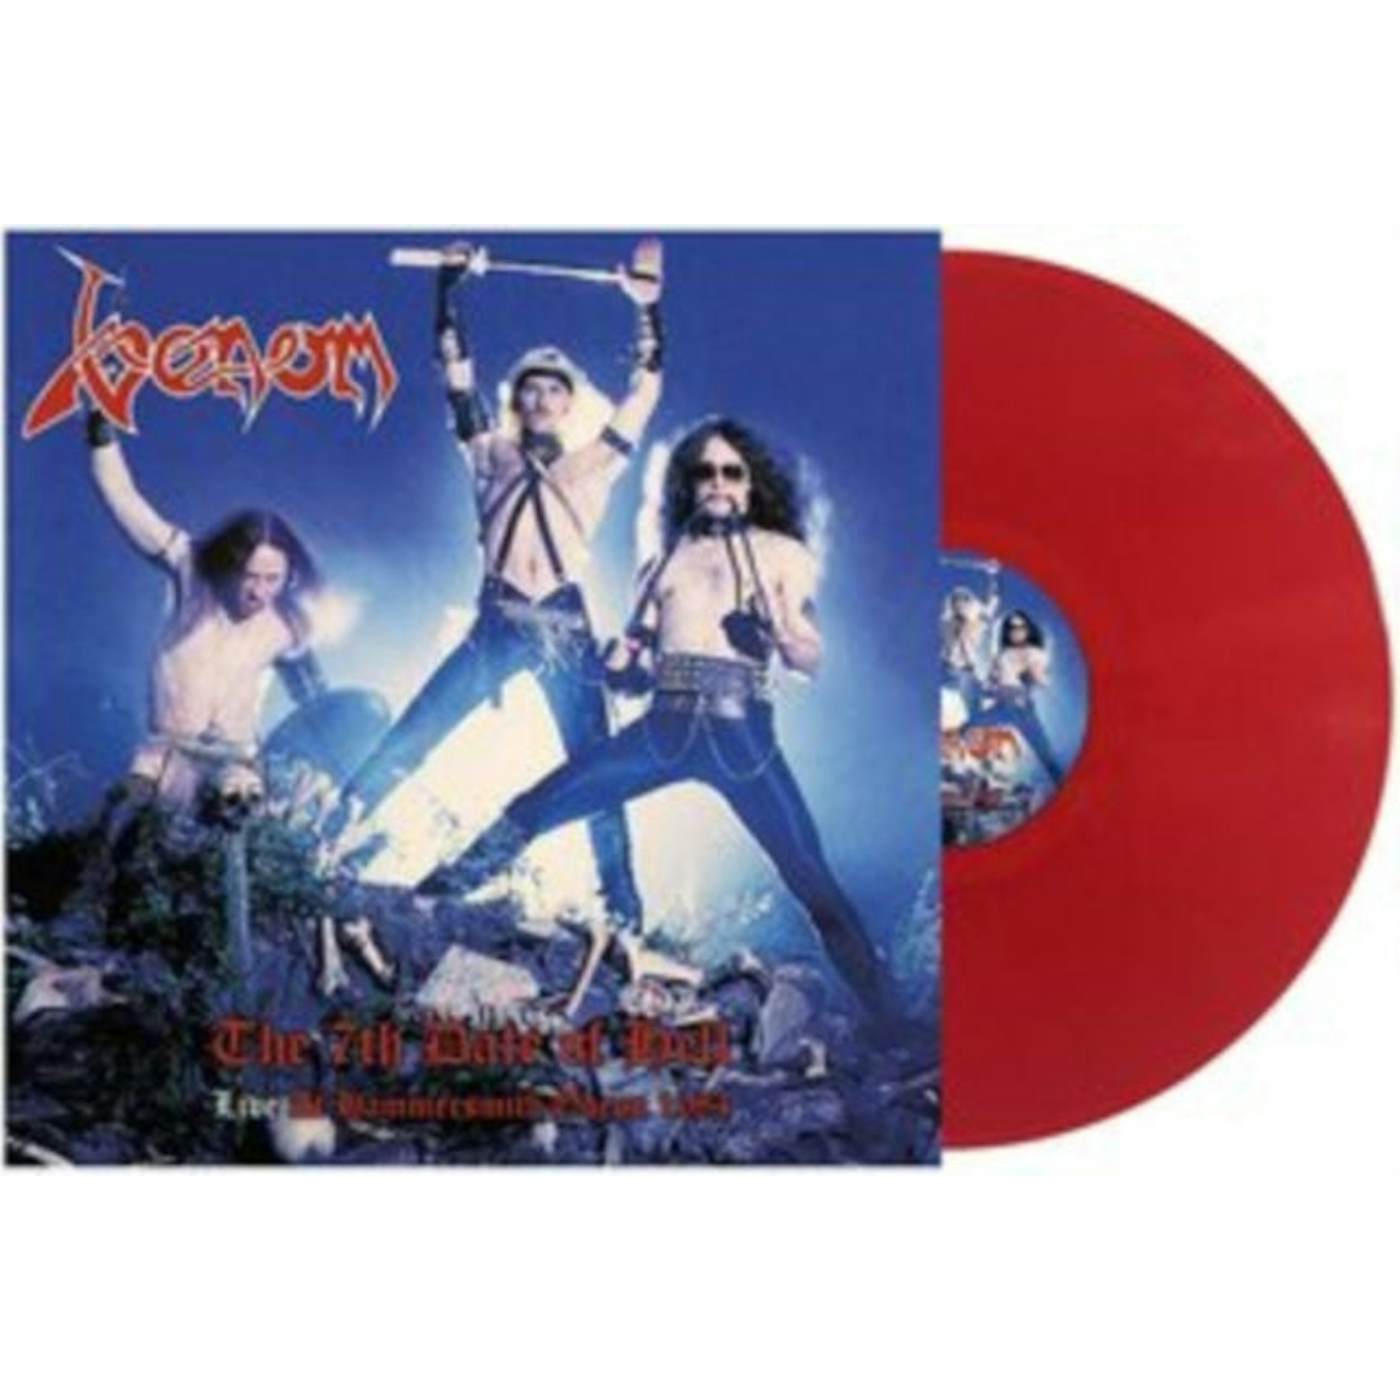 Venom LP - The 7th Date Of Hell - Live At Hammersmith 1984 (Red Vinyl)